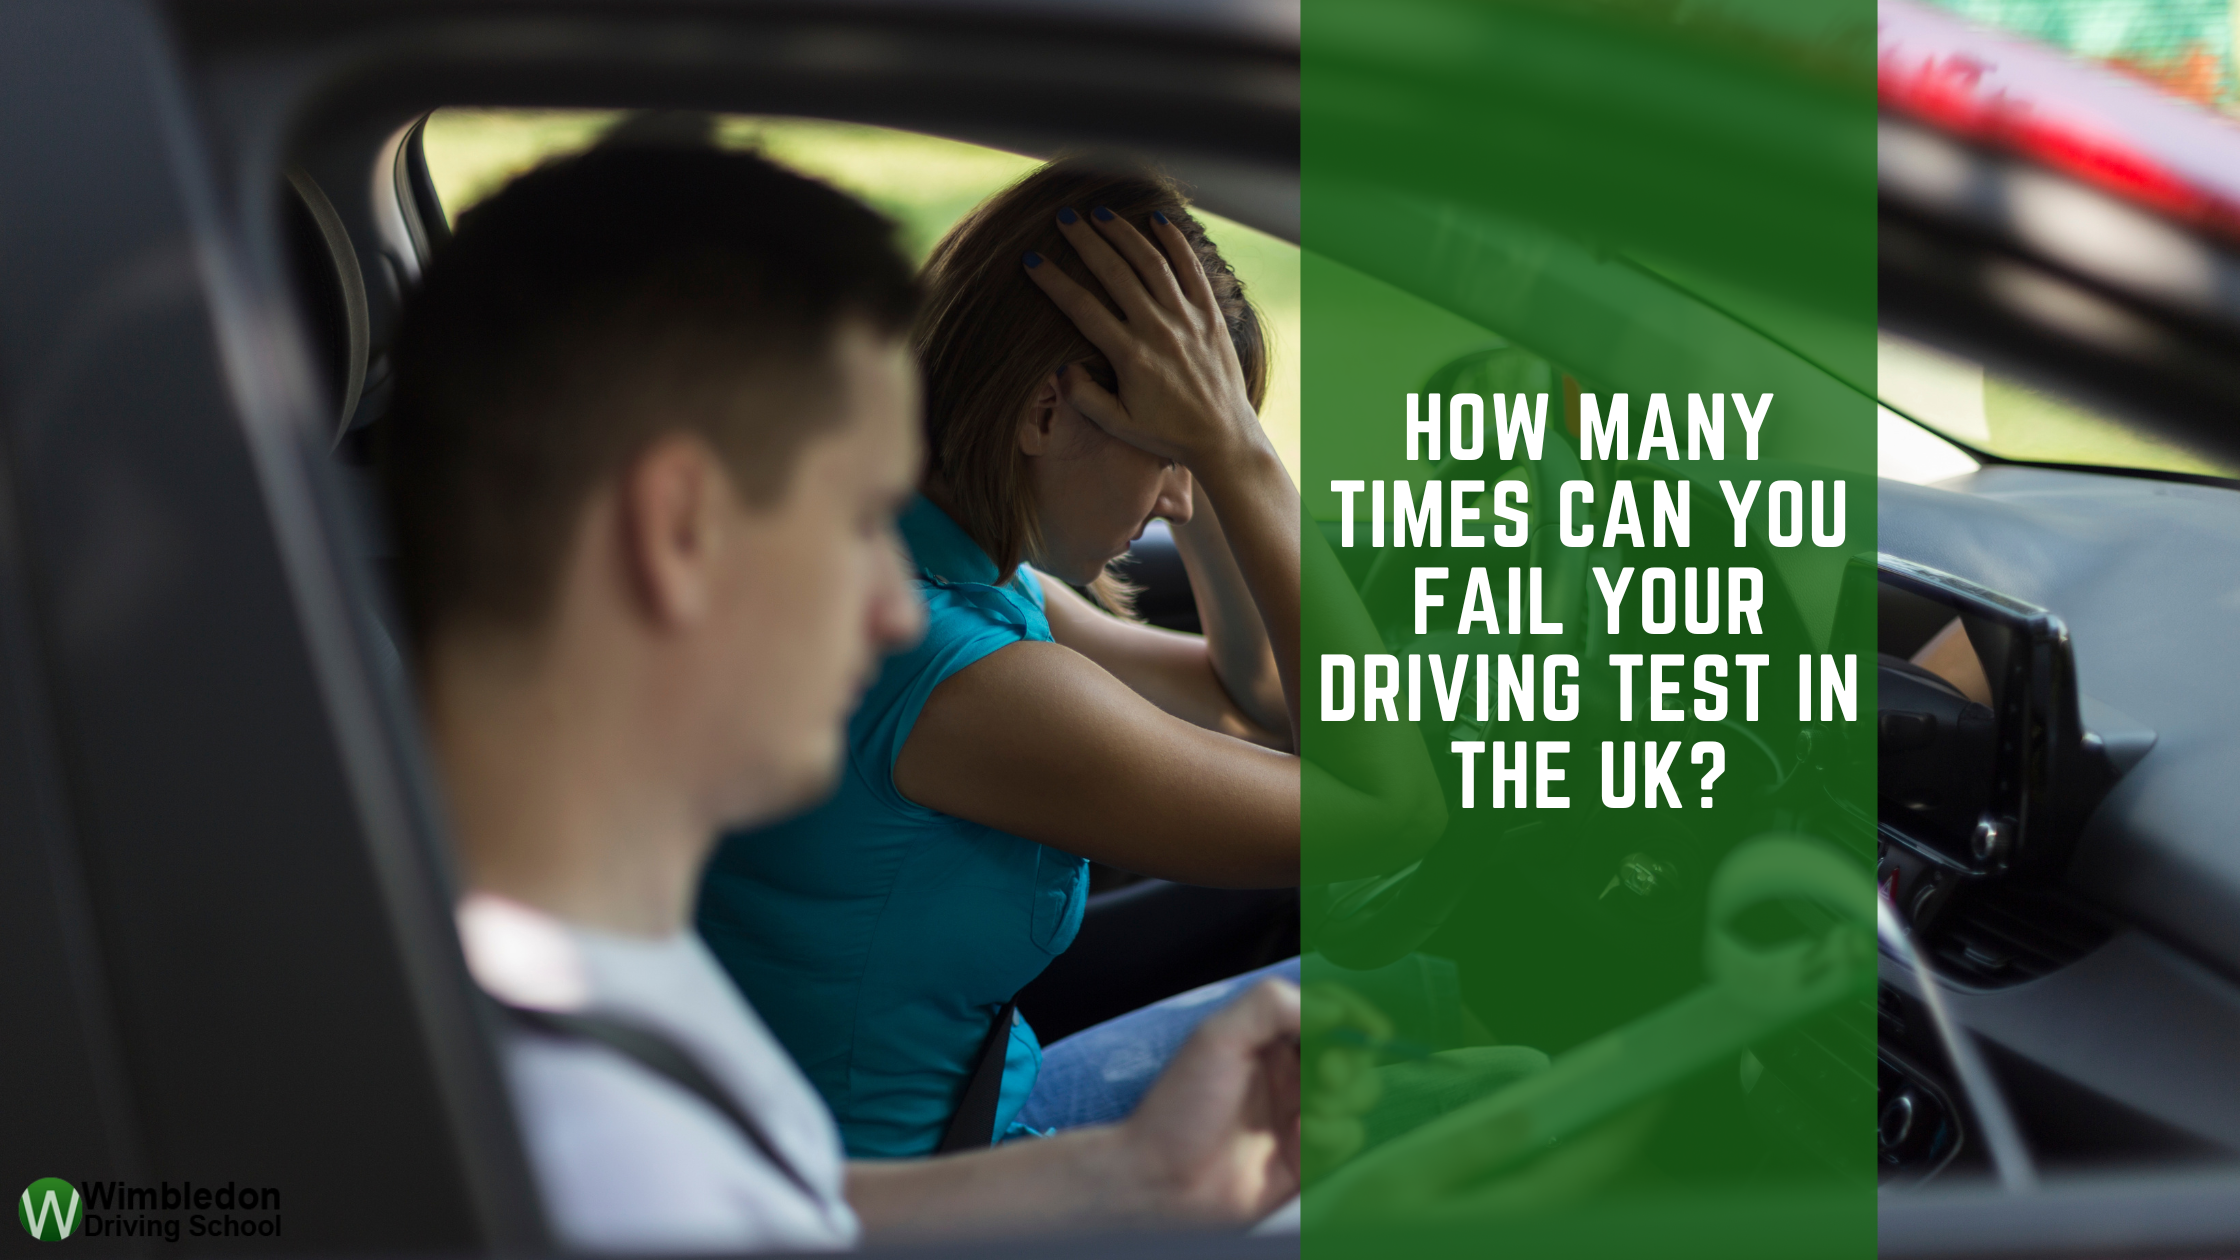 How Many Times Can You Fail Your Driving Test in the UK?